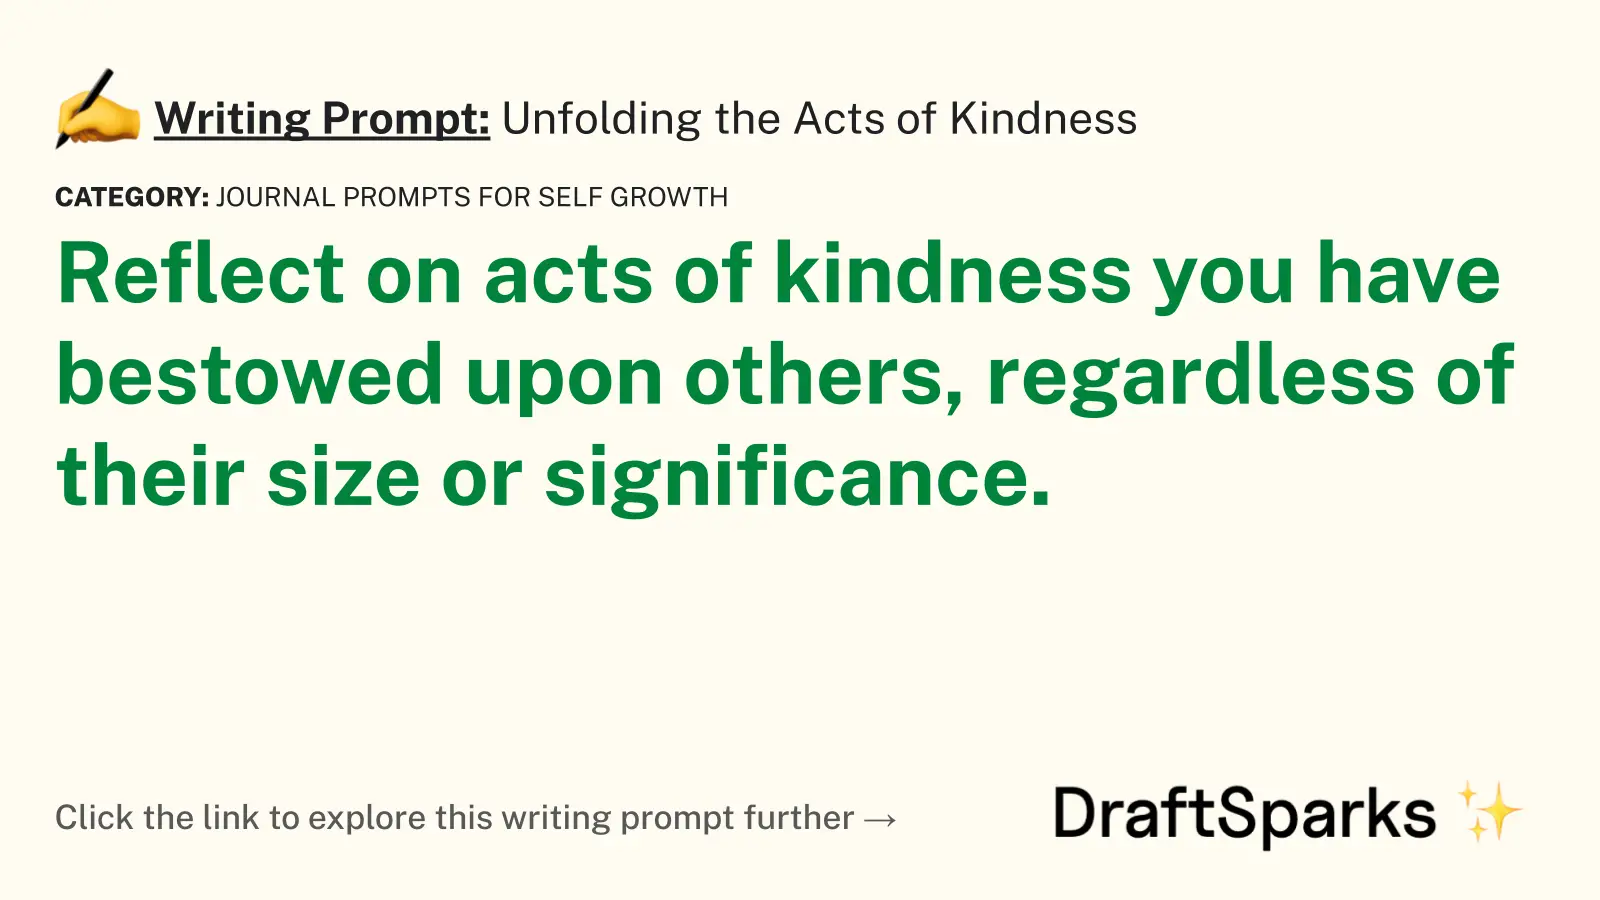 Unfolding the Acts of Kindness